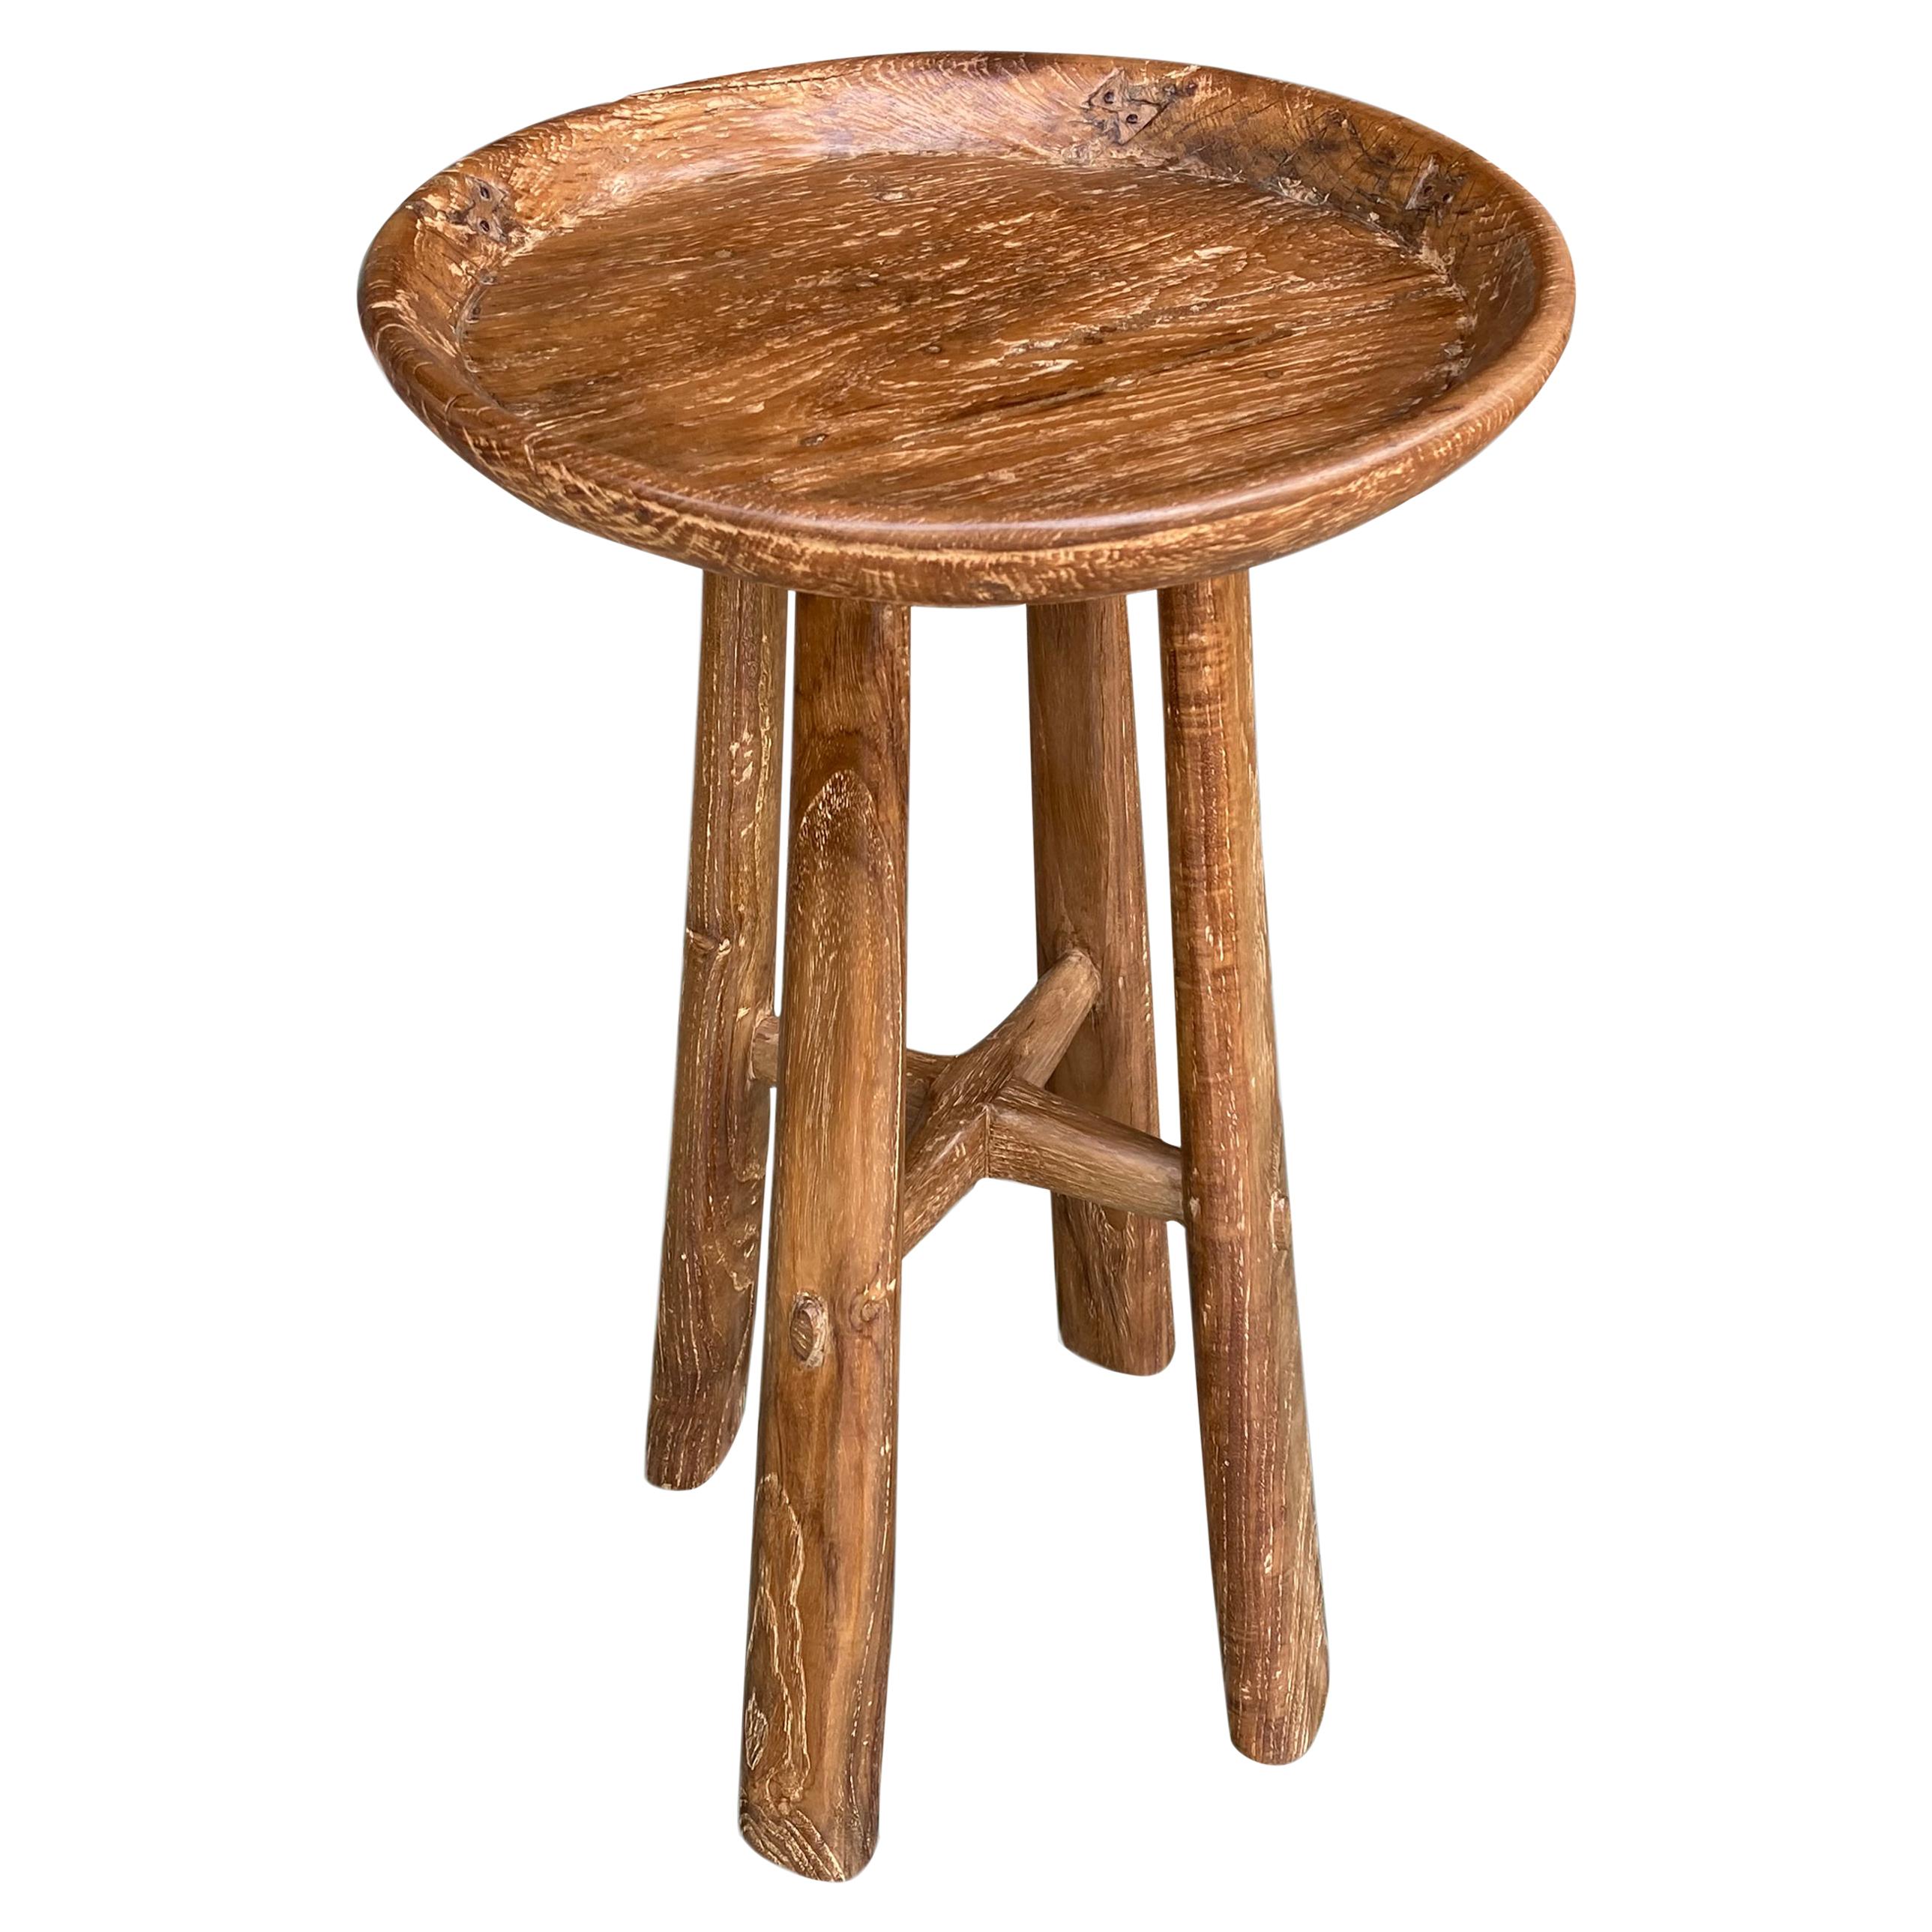 Andrianna Shamaris Midcentury Couture Antique Teak Wood Tray Side Table